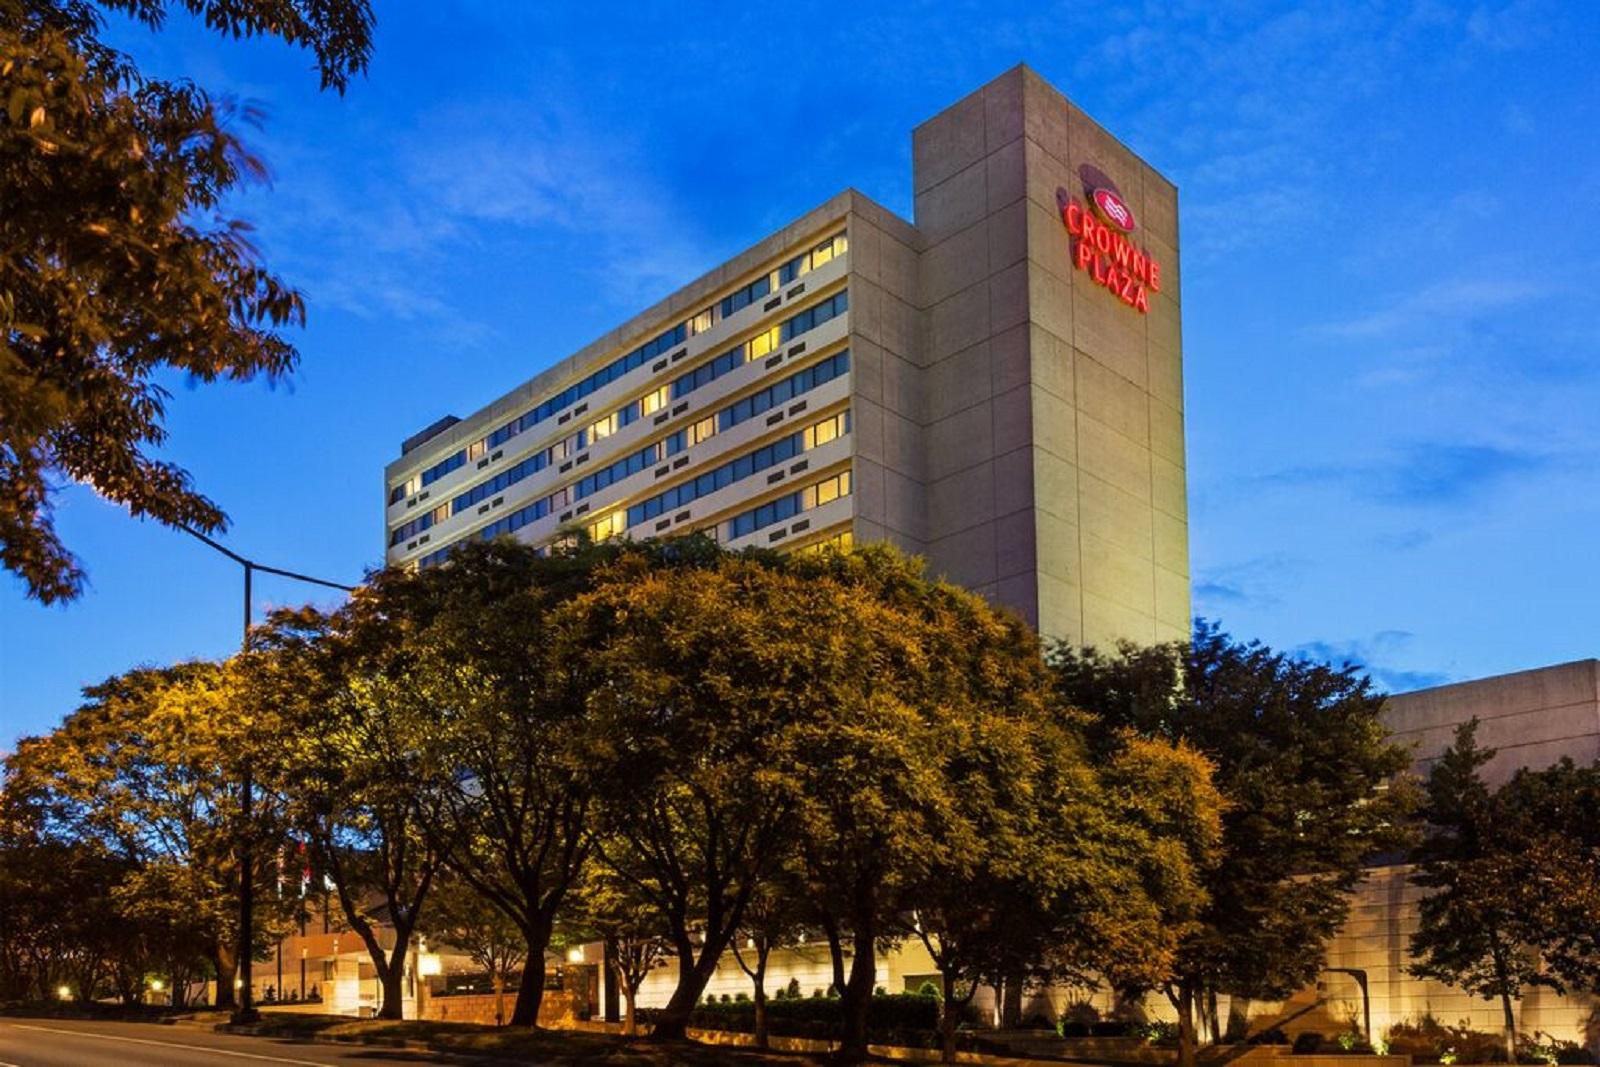 Welcome to the Crowne Plaza Knoxville!